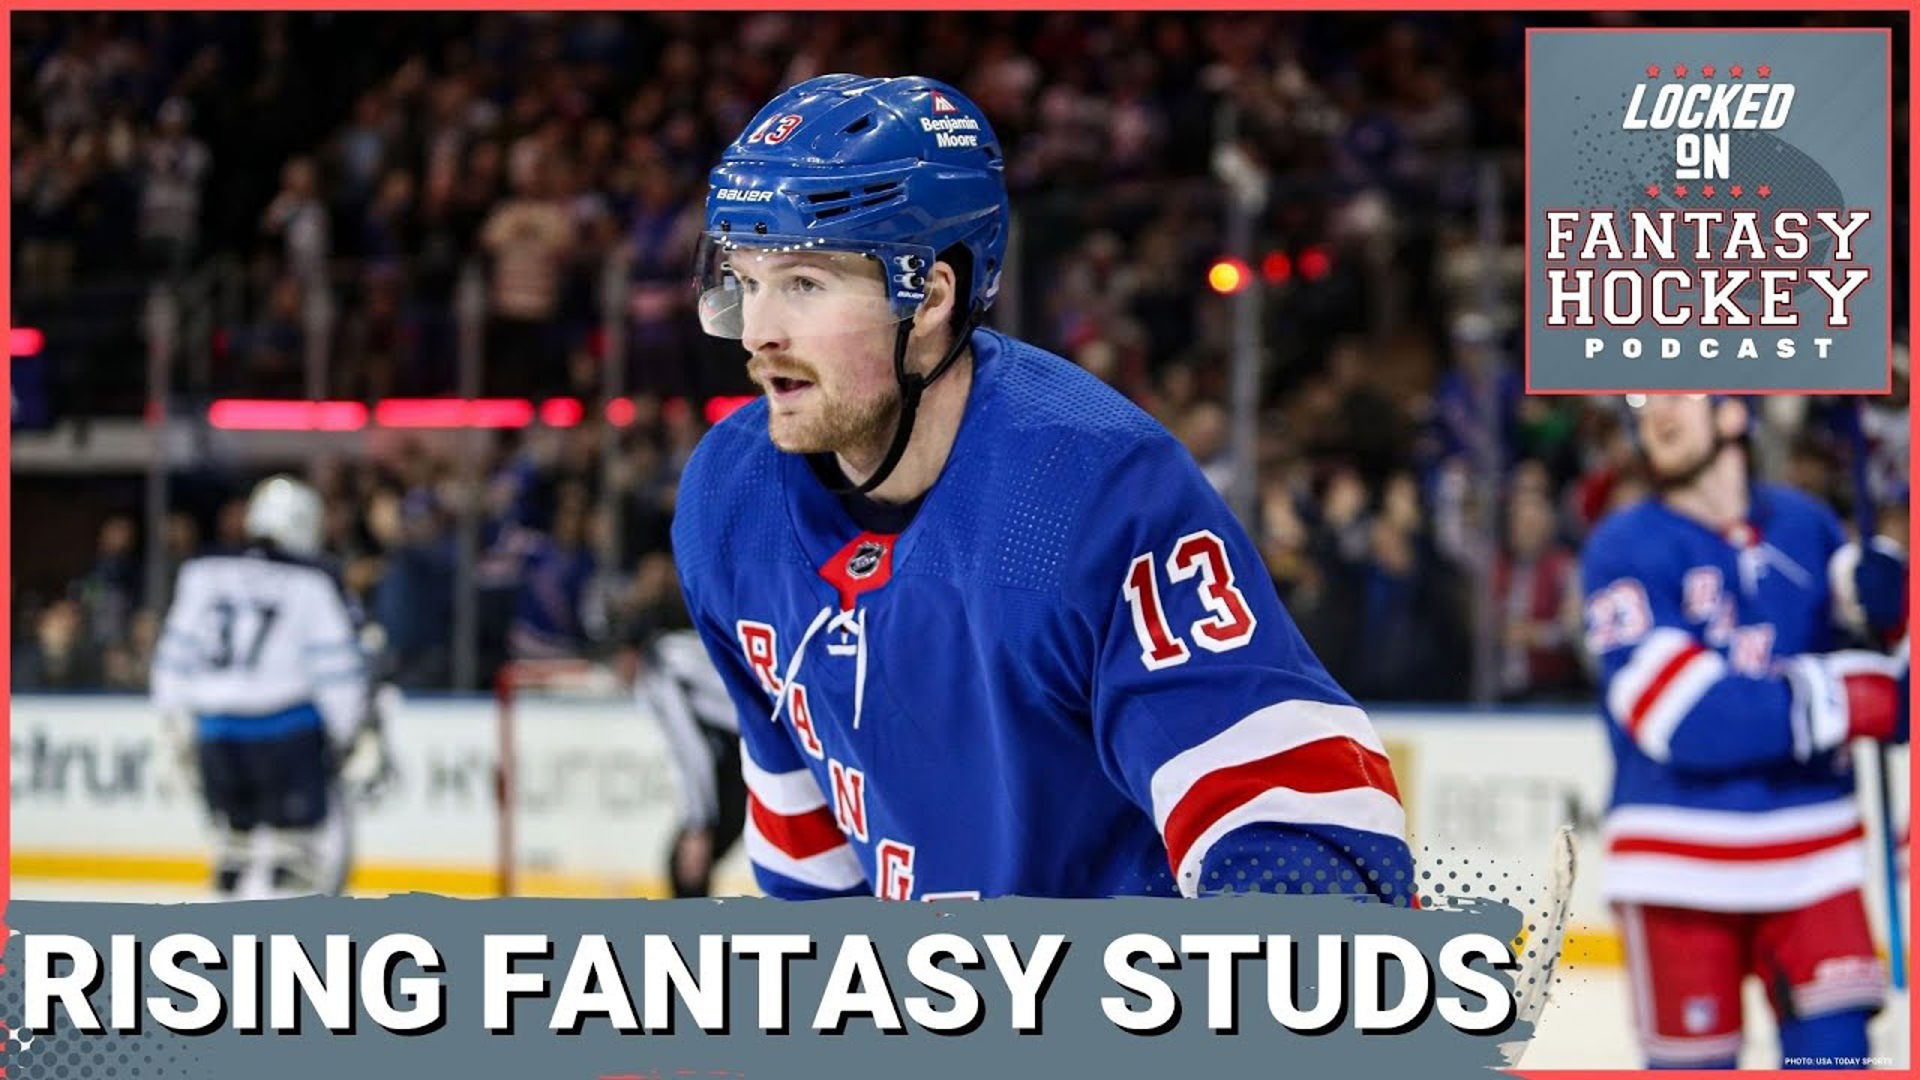 Conversely to Thursday' episode, Friday we take a look at a number of NHL stars who are boosting their fantasy draft value with big-time playoff performances.